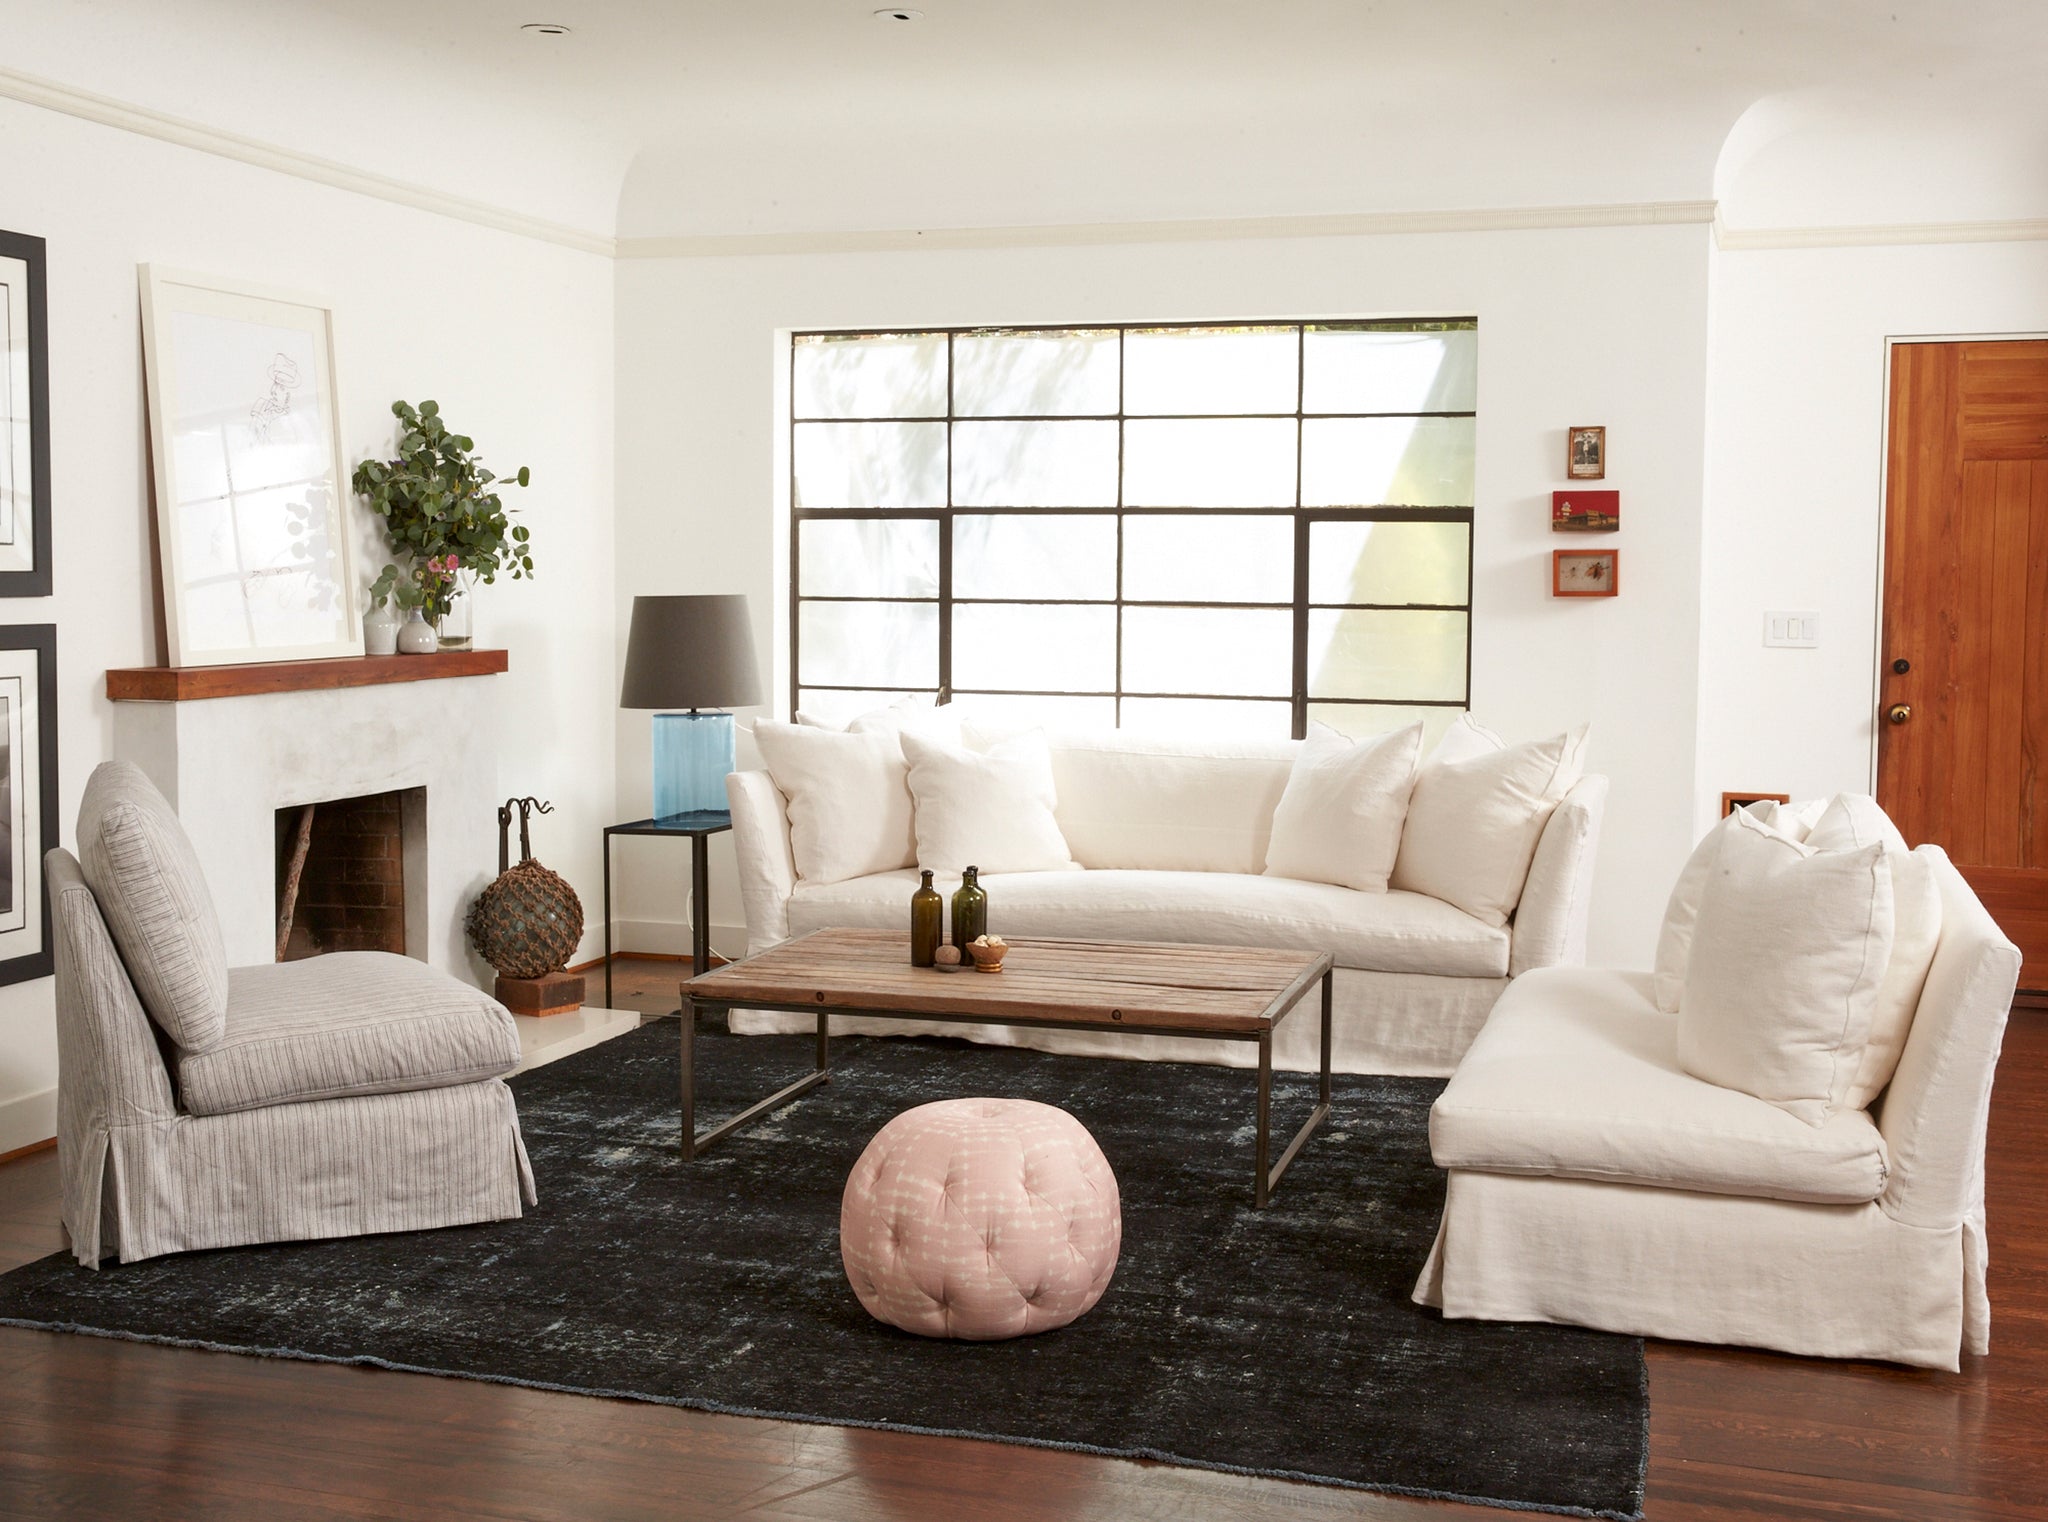  Living room setting in a white painted room with a large window. There is a dark patchwork rug with two slip covered sofas in a white fabric and a slip covered chair in a white fabric. There is a rectangular coffee table in the center of the room and a small circular pouf in a light pink fabric. Alongside one of the sofas is a side table and a cylinder table lamp on top in a light blue finish and has a dark grey fabric lamp shade.  